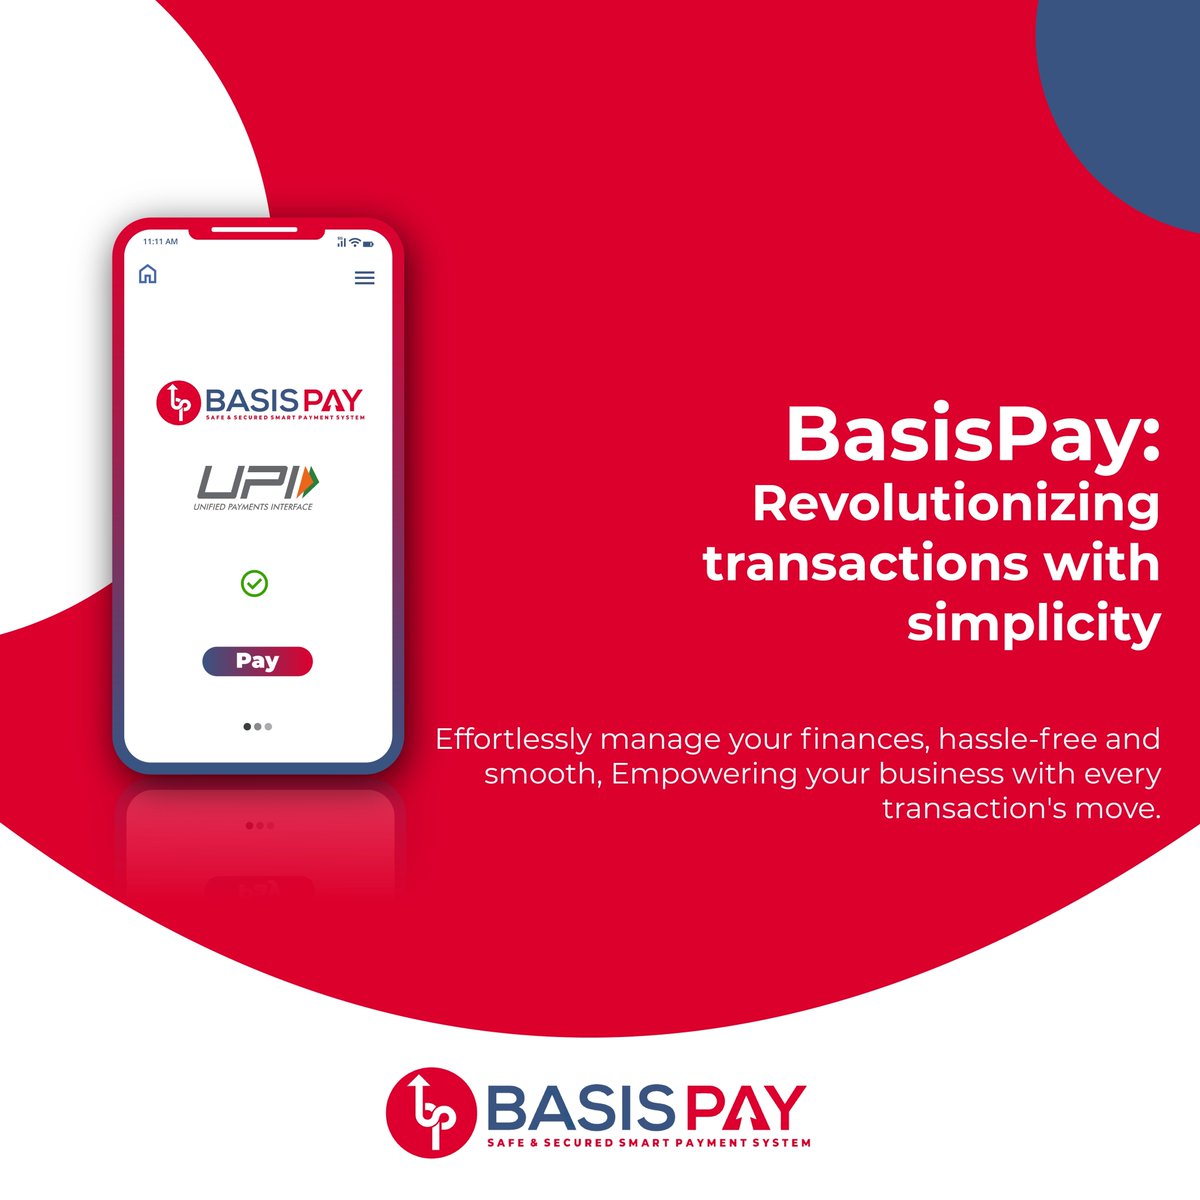 BasisPay payment solutions #basispay #upi #pointofsale #contactlesspayments #buy #bank #finance #news #online #mobile #shopping #pos #qrpay #qr #digitalpayment #payments #paymentgateway #india #digitalmoney #debitcard #creditcard #buy #digital #mobilepayment #world #ai